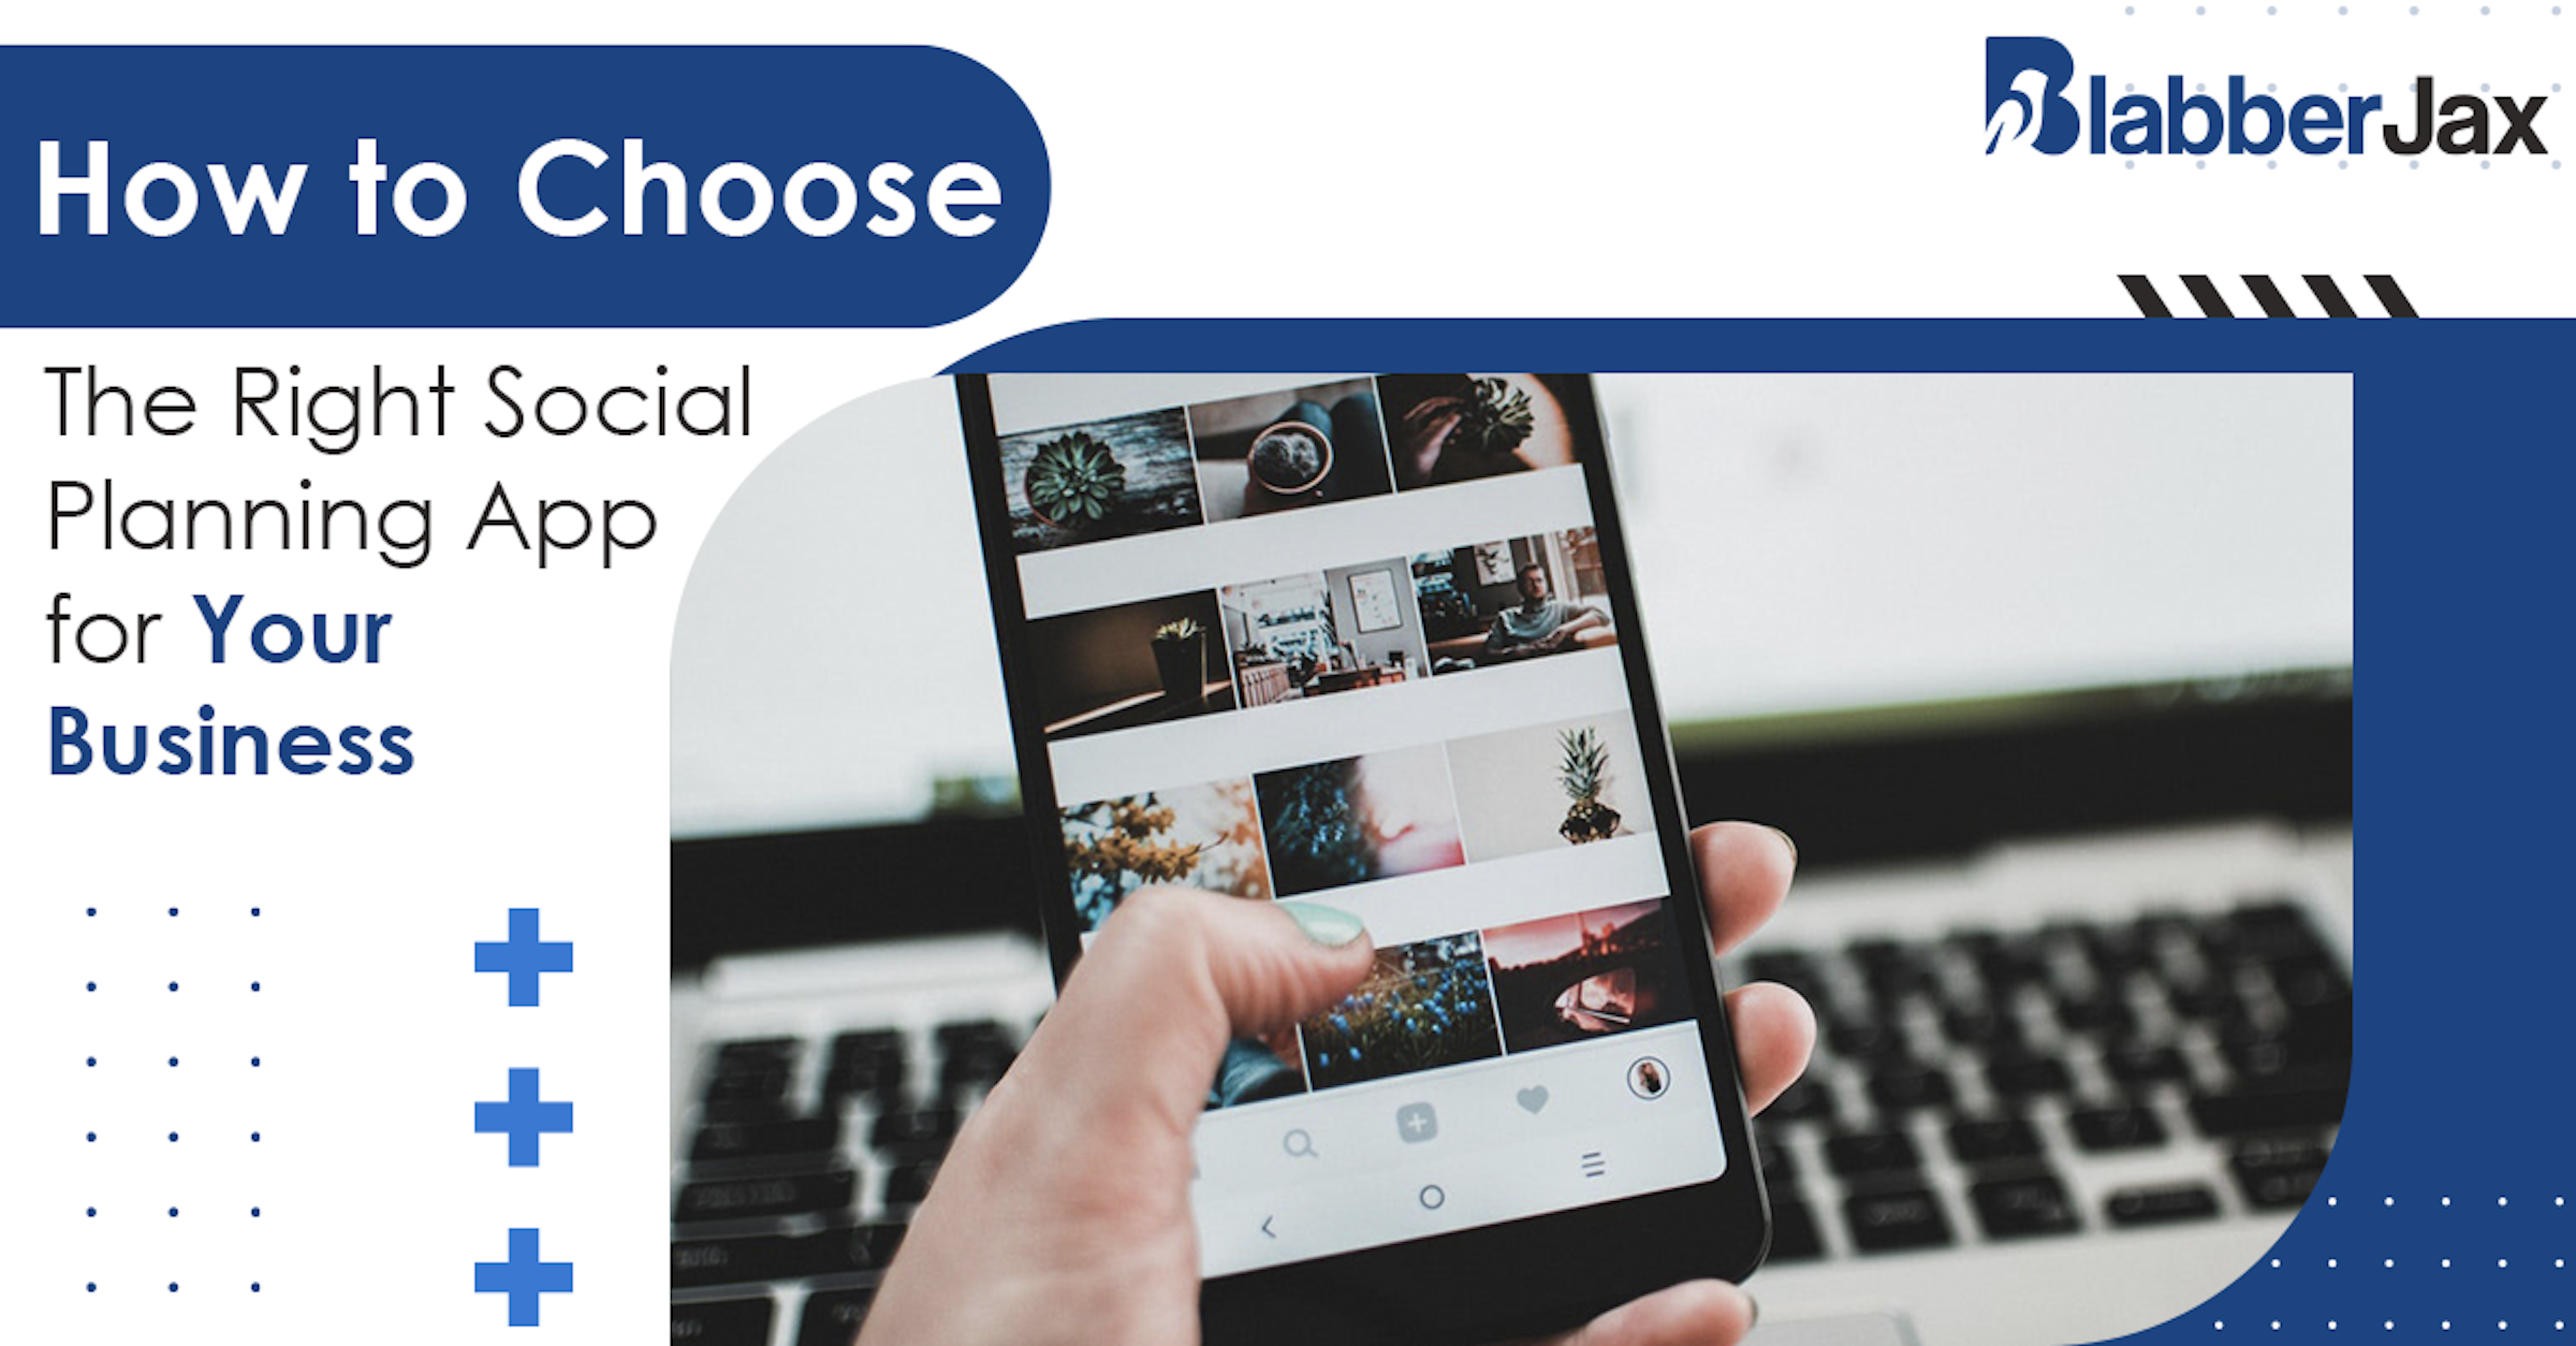 How to Choose the Right Social Planning App for Your Business